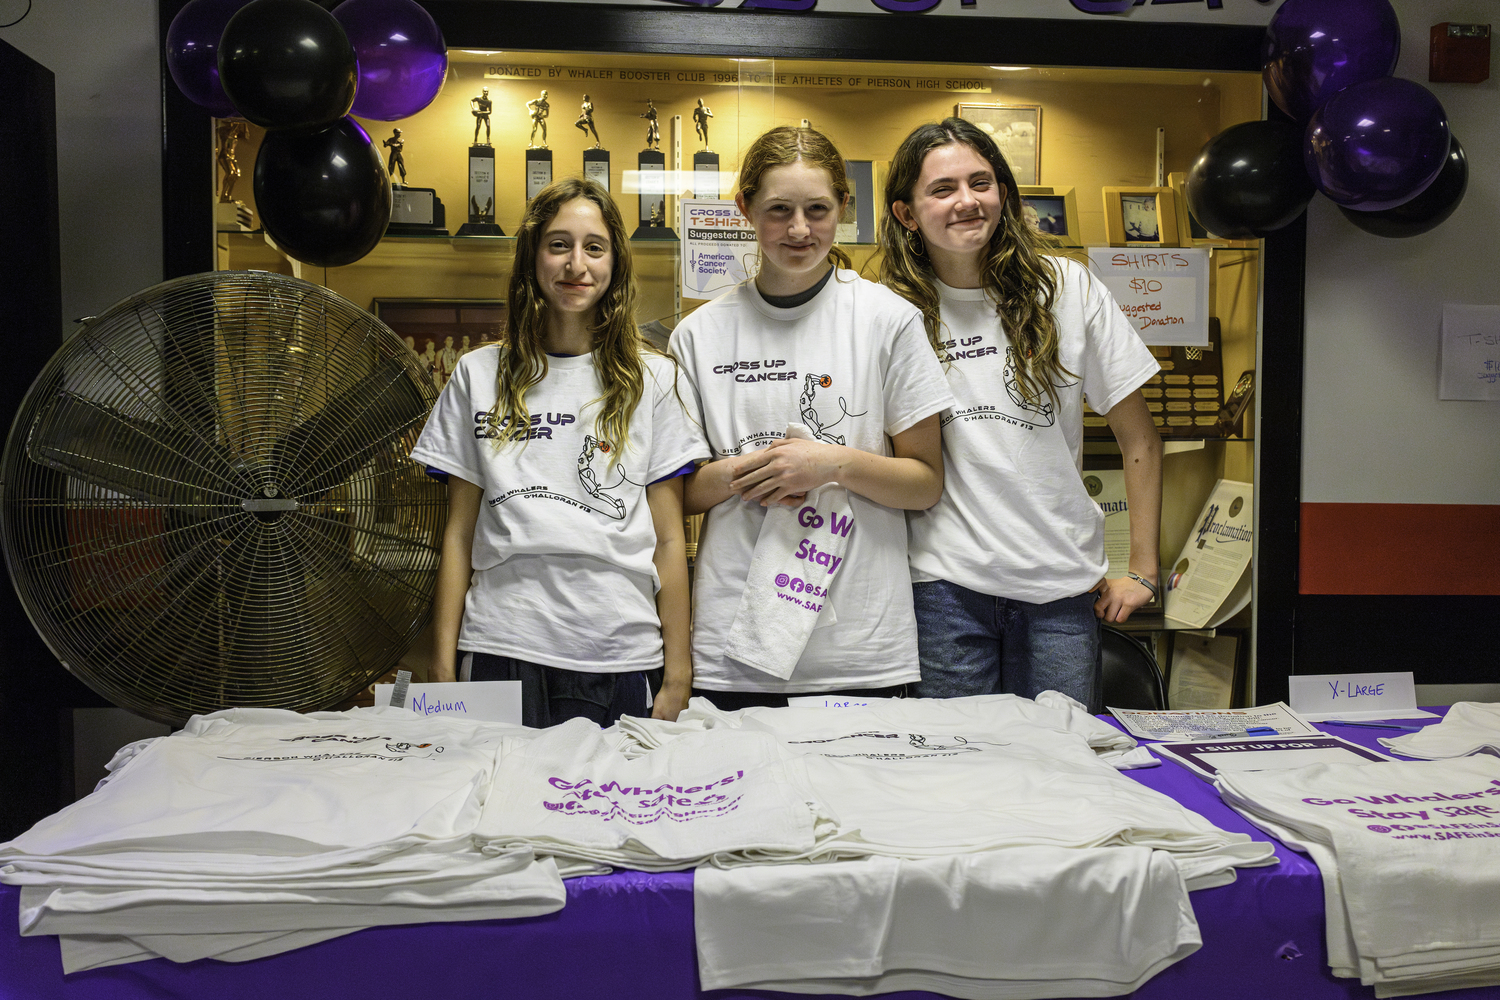 Students Molly Wolfson, left, Josie Mott and Sadie Culver sold T-shirts at Friday night's game with proceeds going to the American Cancer Society.  MARIANNE BARNETT